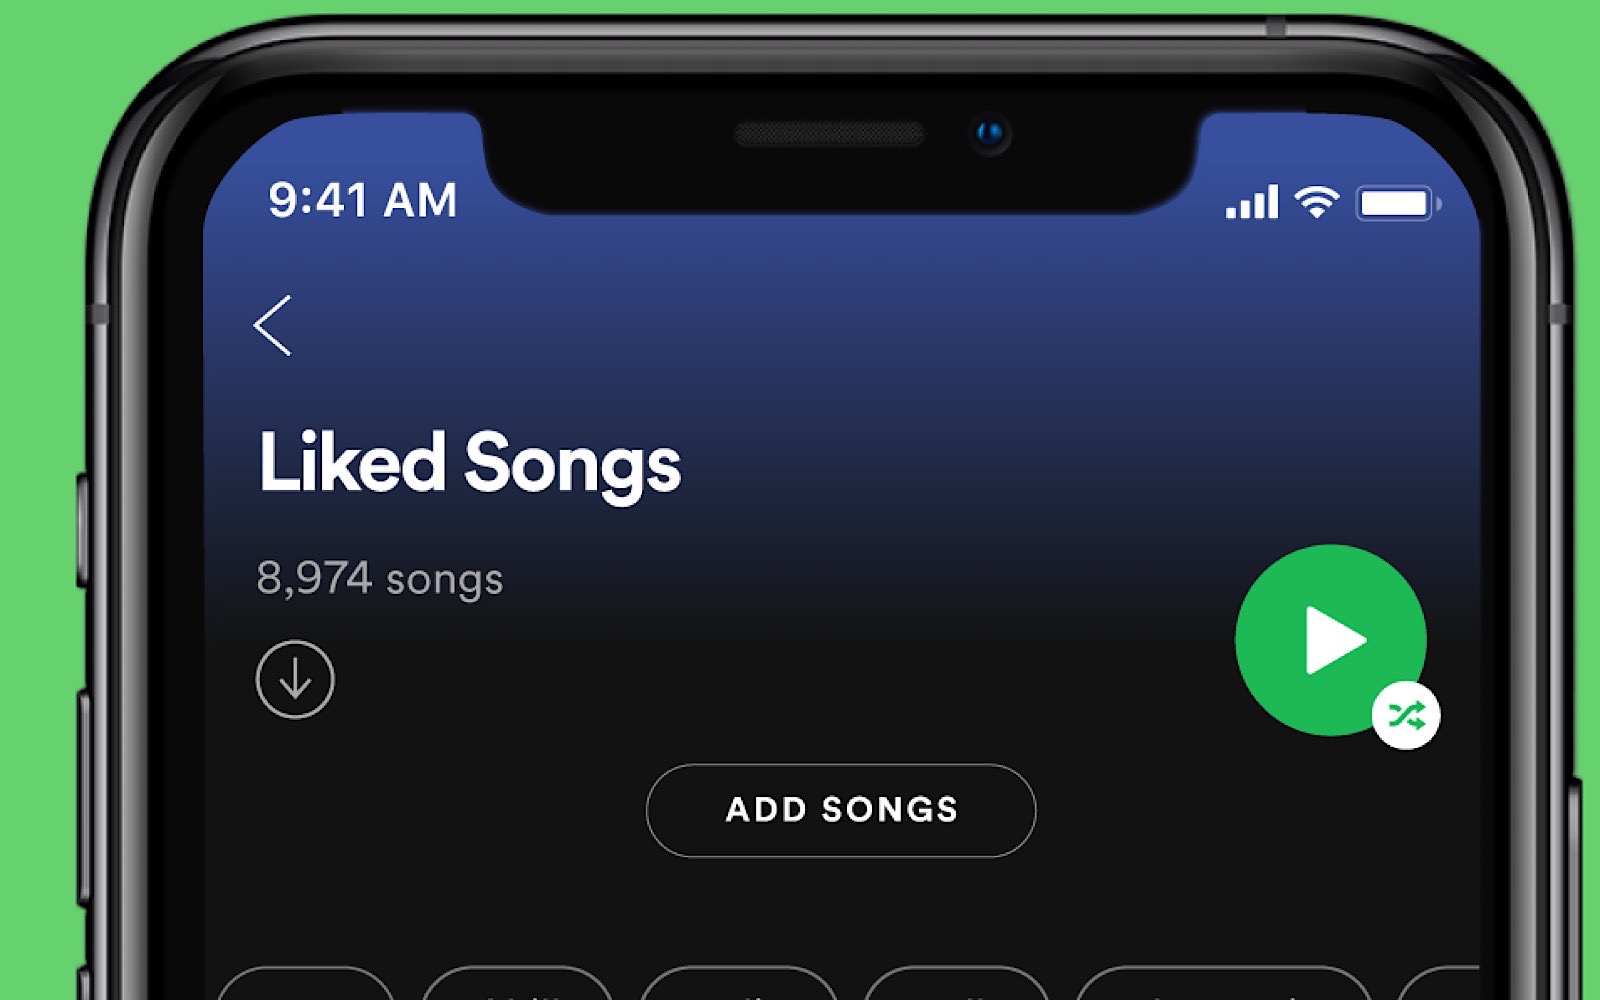 Spotify's song genre matching